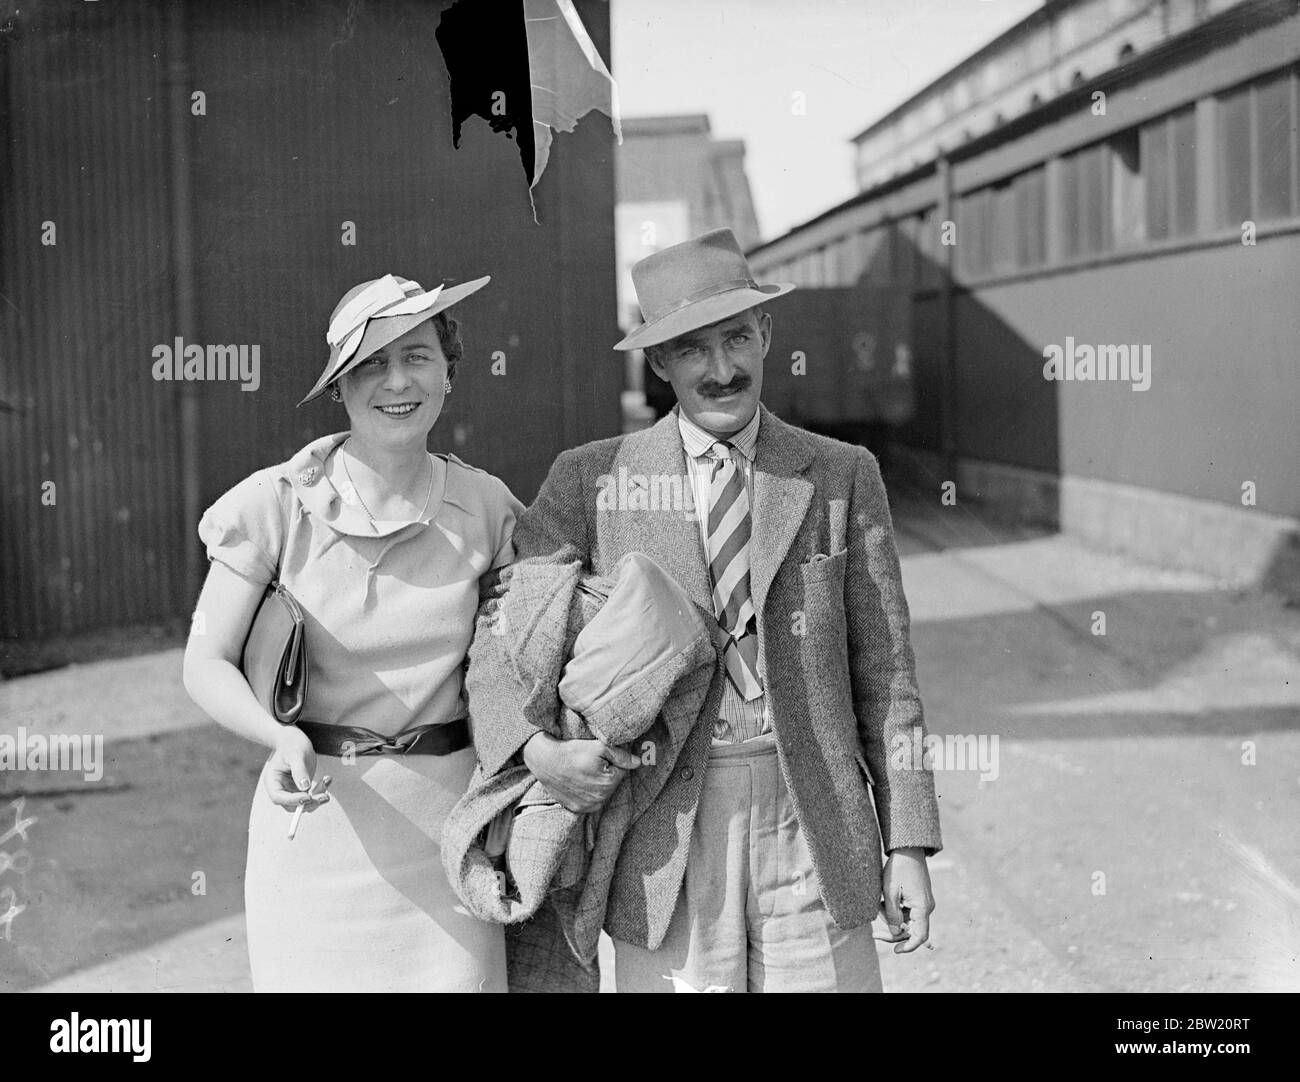 Captain Gimson of the Guides Cavalry, arrived at the southampton port by flying boat from India. Where he led a party of tochi scouts on a night raid to capture a mountain position held by tribesmen. He was met on arrival by his wife. 14 July 1937. Stock Photo